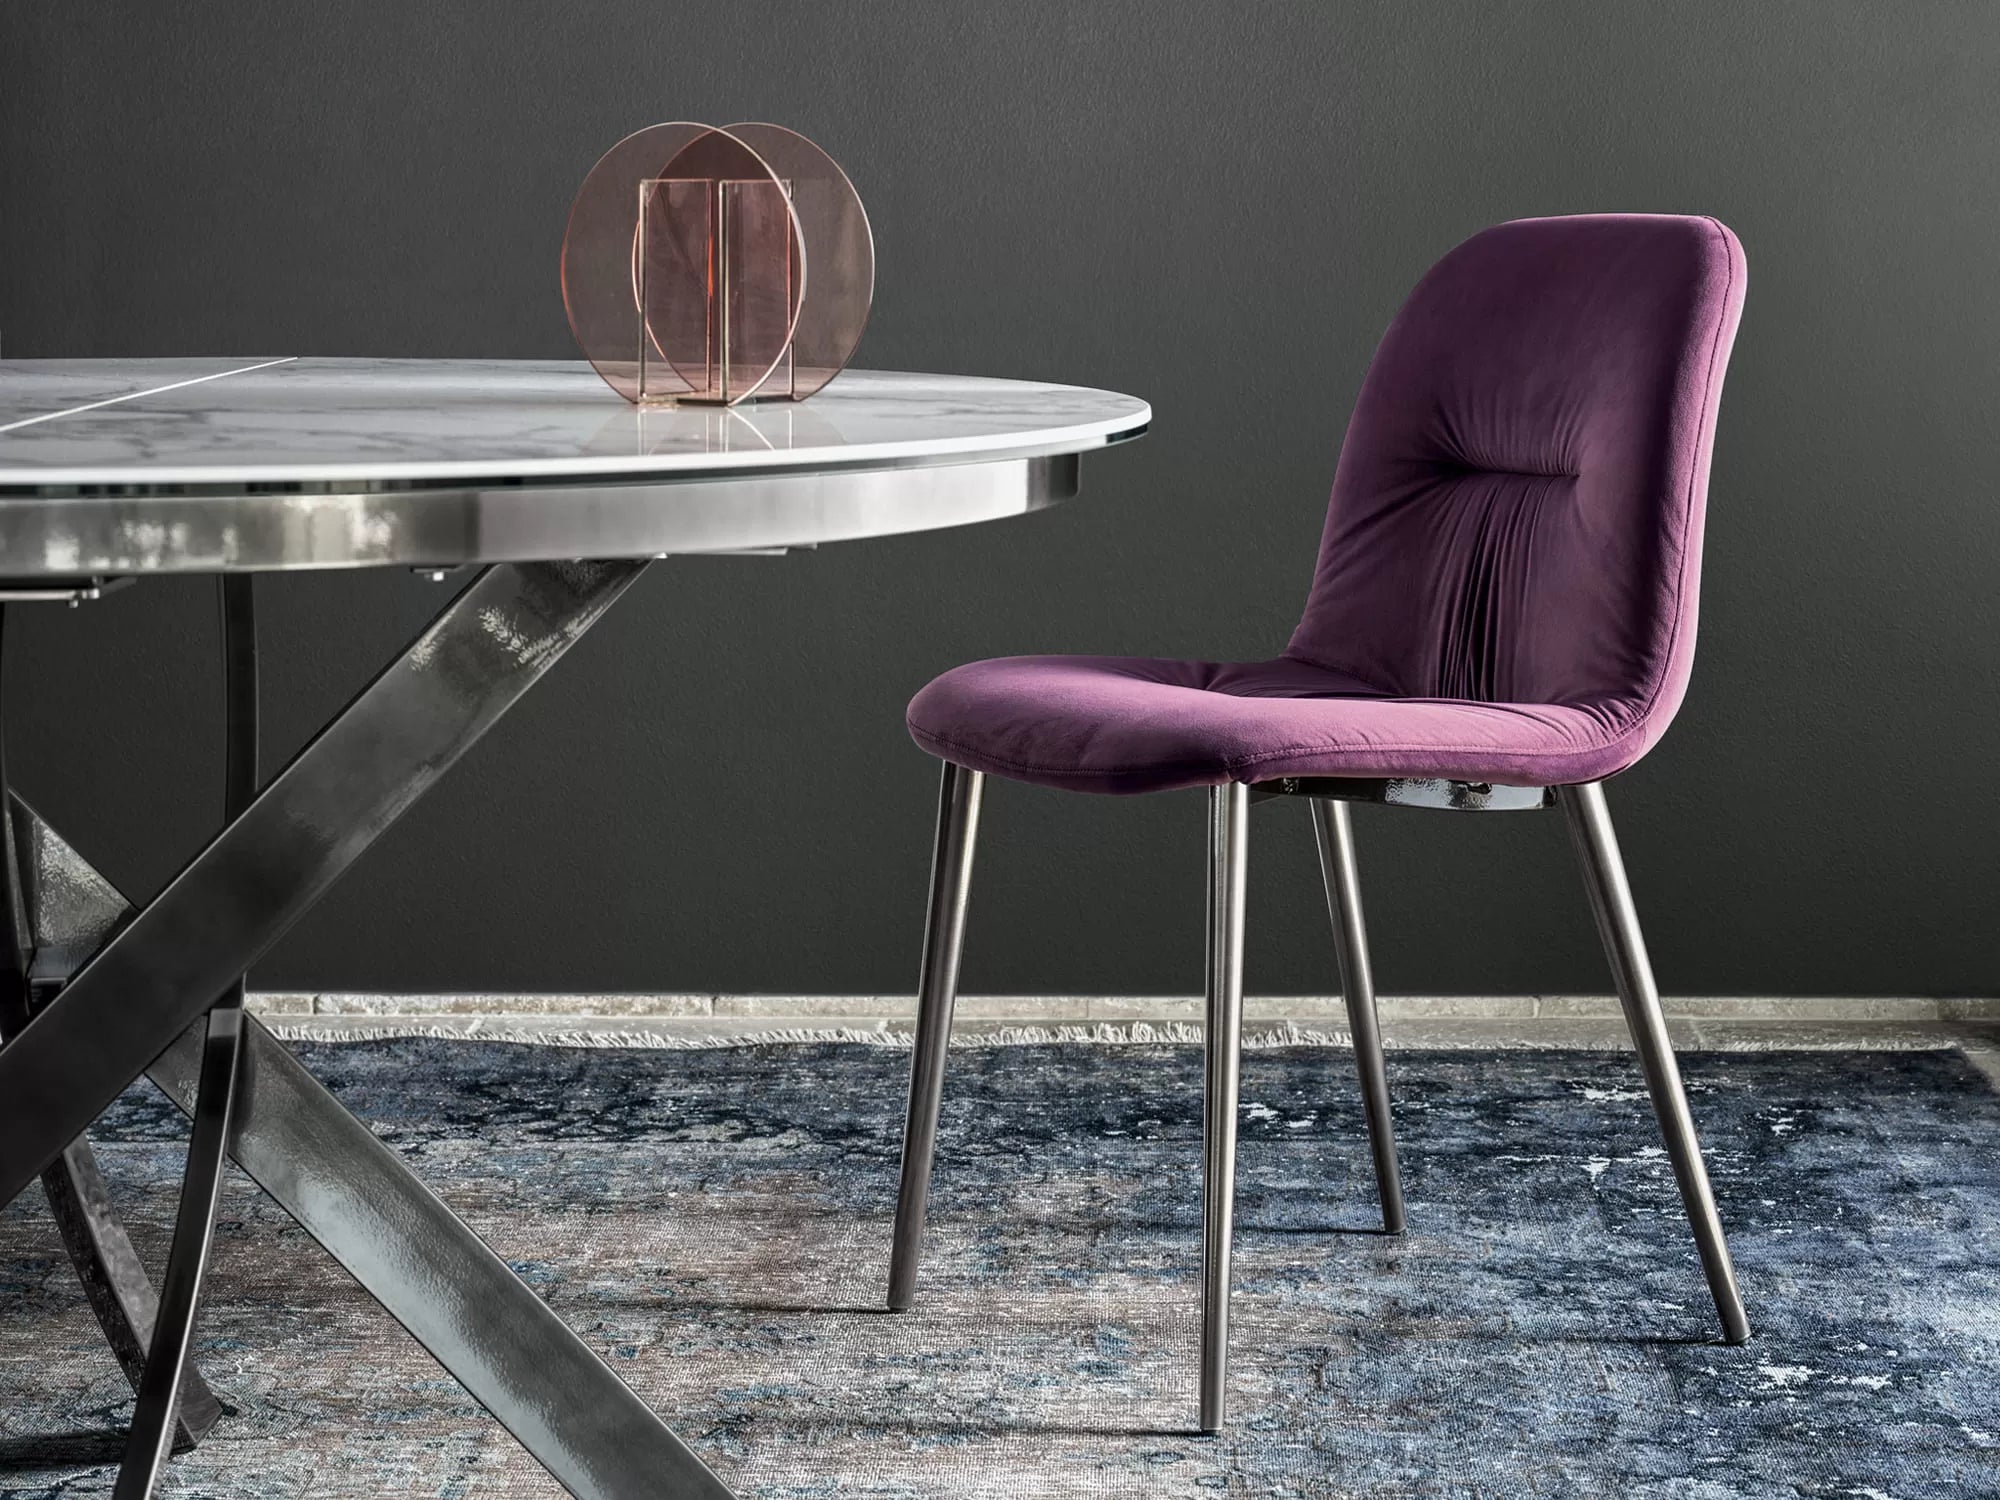 Barone Round Extending Table With Lacquered Metal Frame